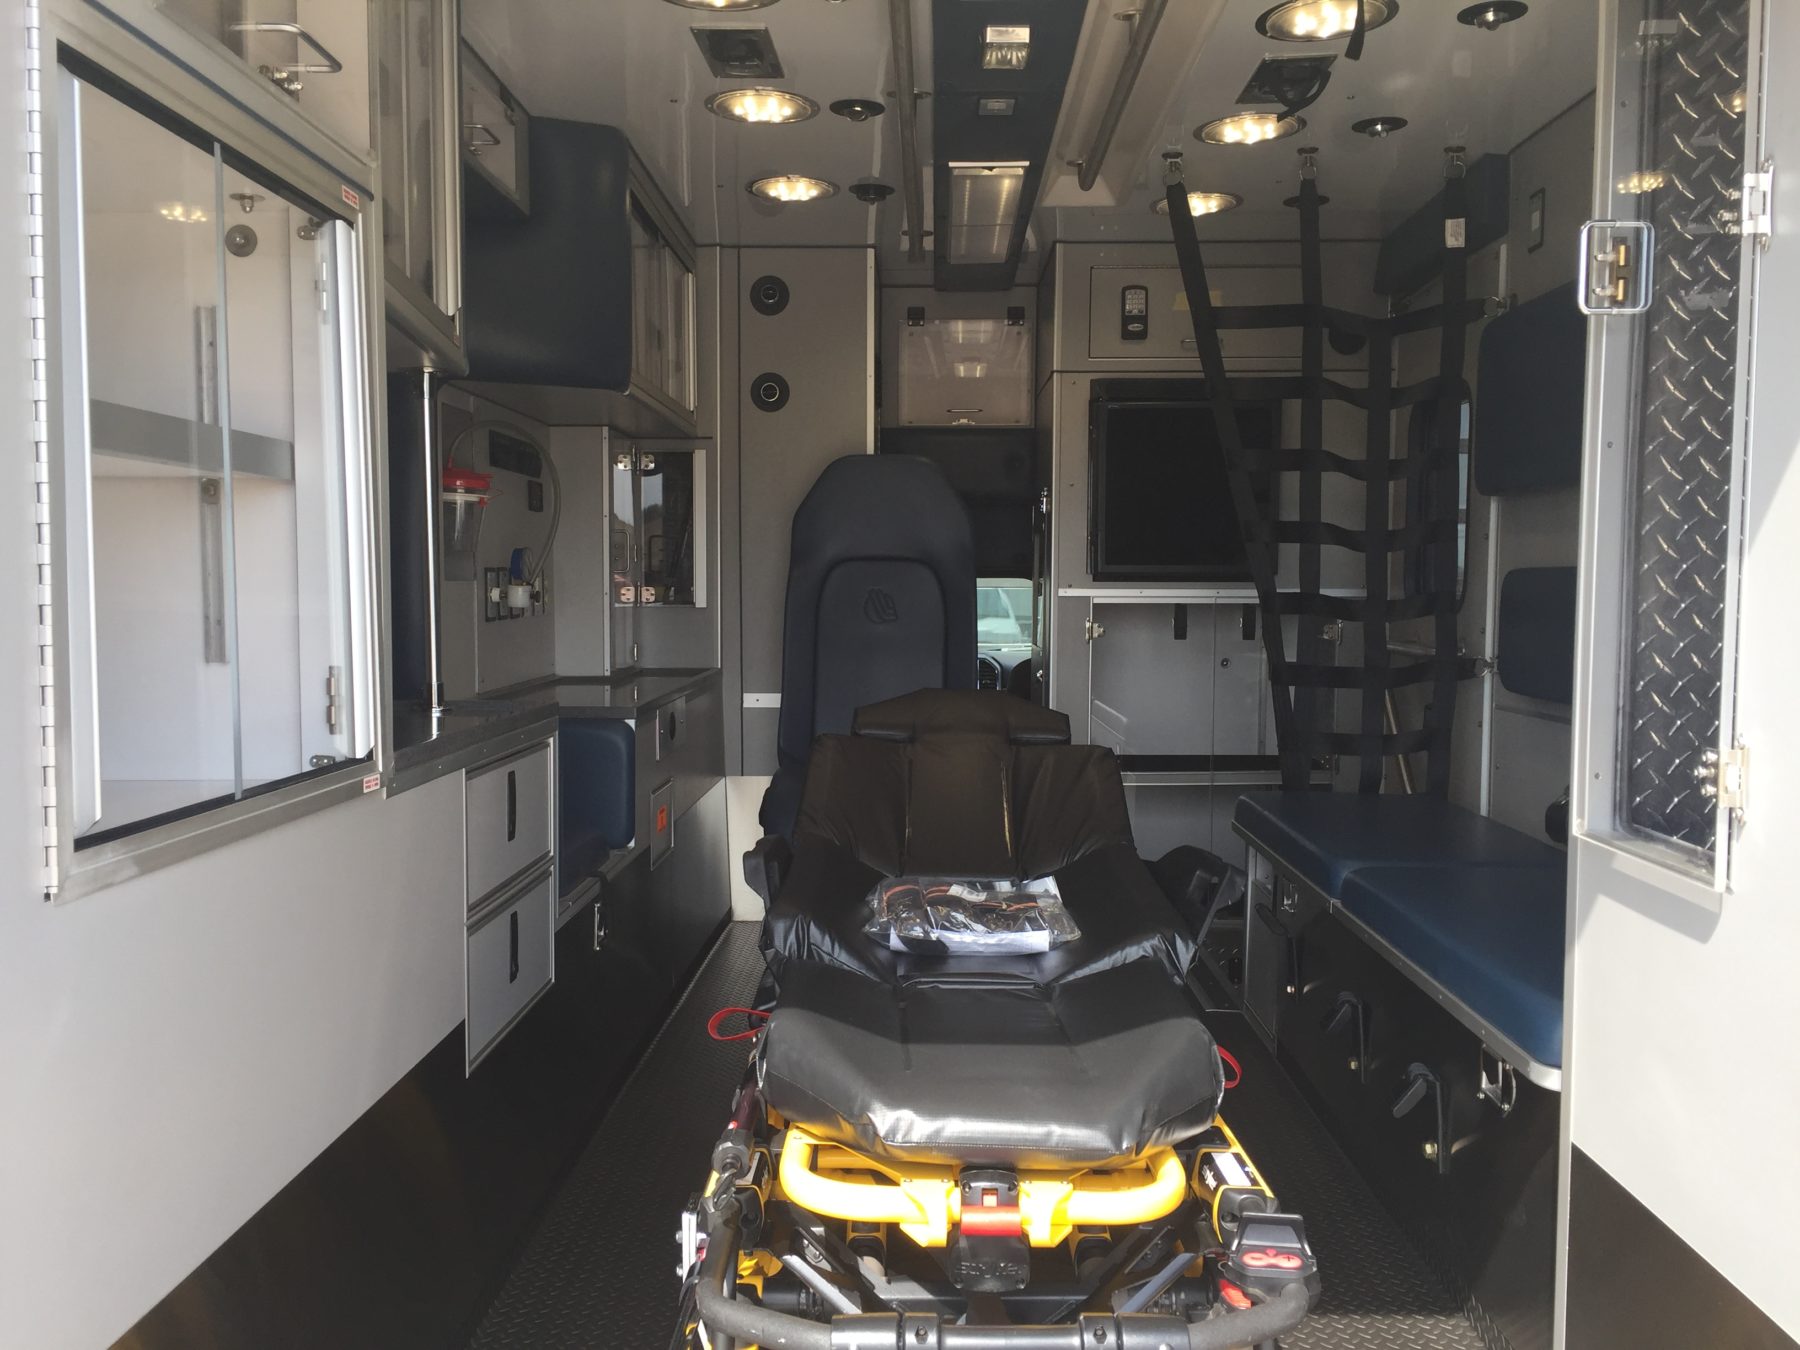 2017 Ford F450 4x4 Heavy Duty Ambulance For Sale – Picture 2